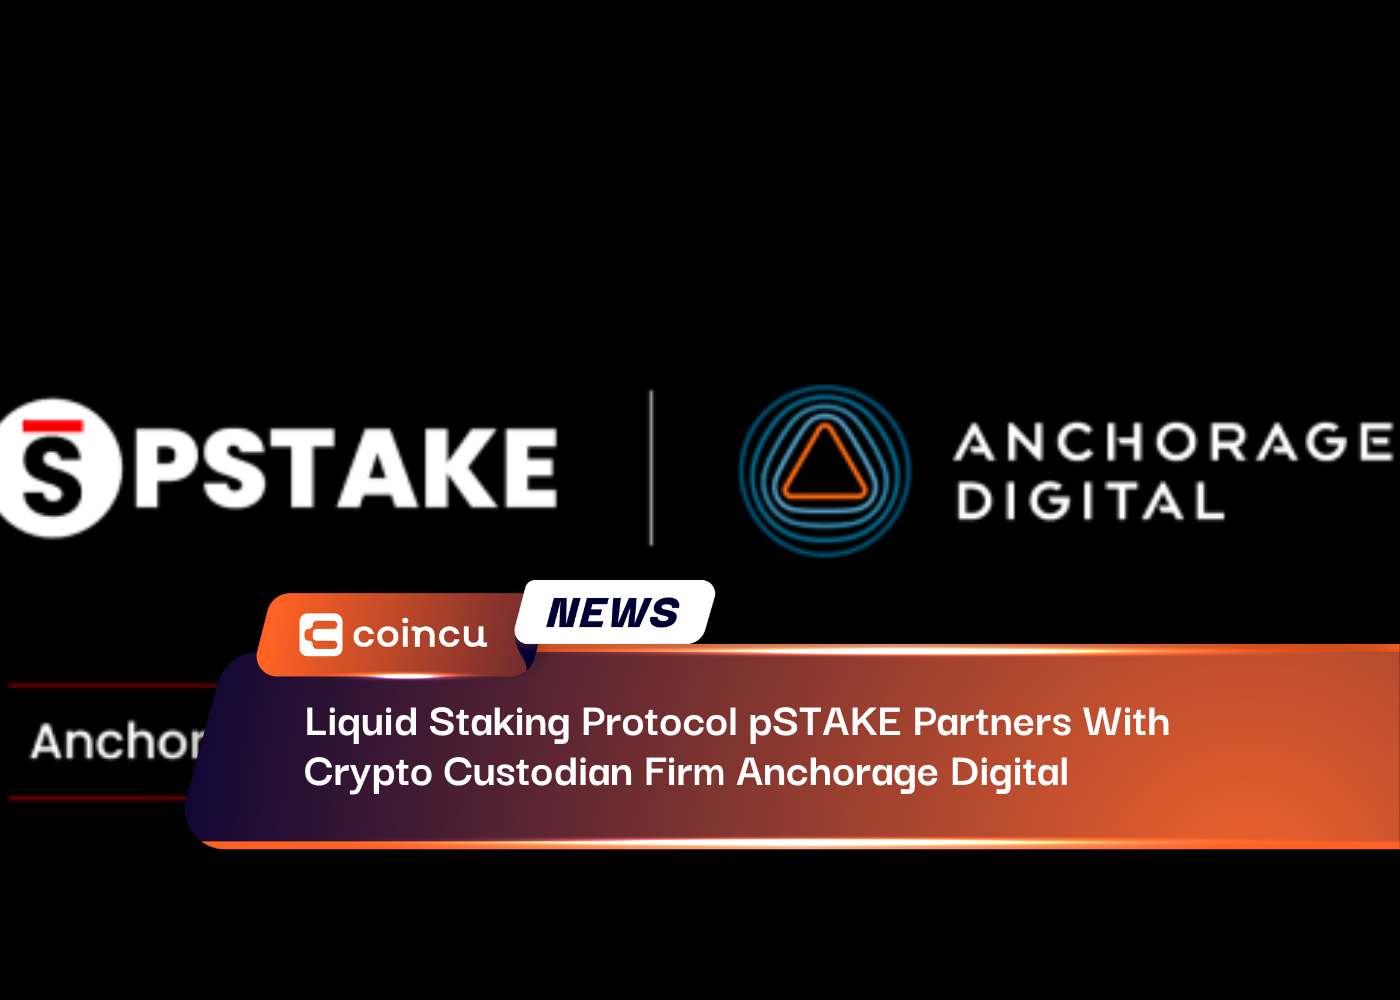 Liquid Staking Protocol pSTAKE Partners With Crypto Custodian Firm Anchorage Digital